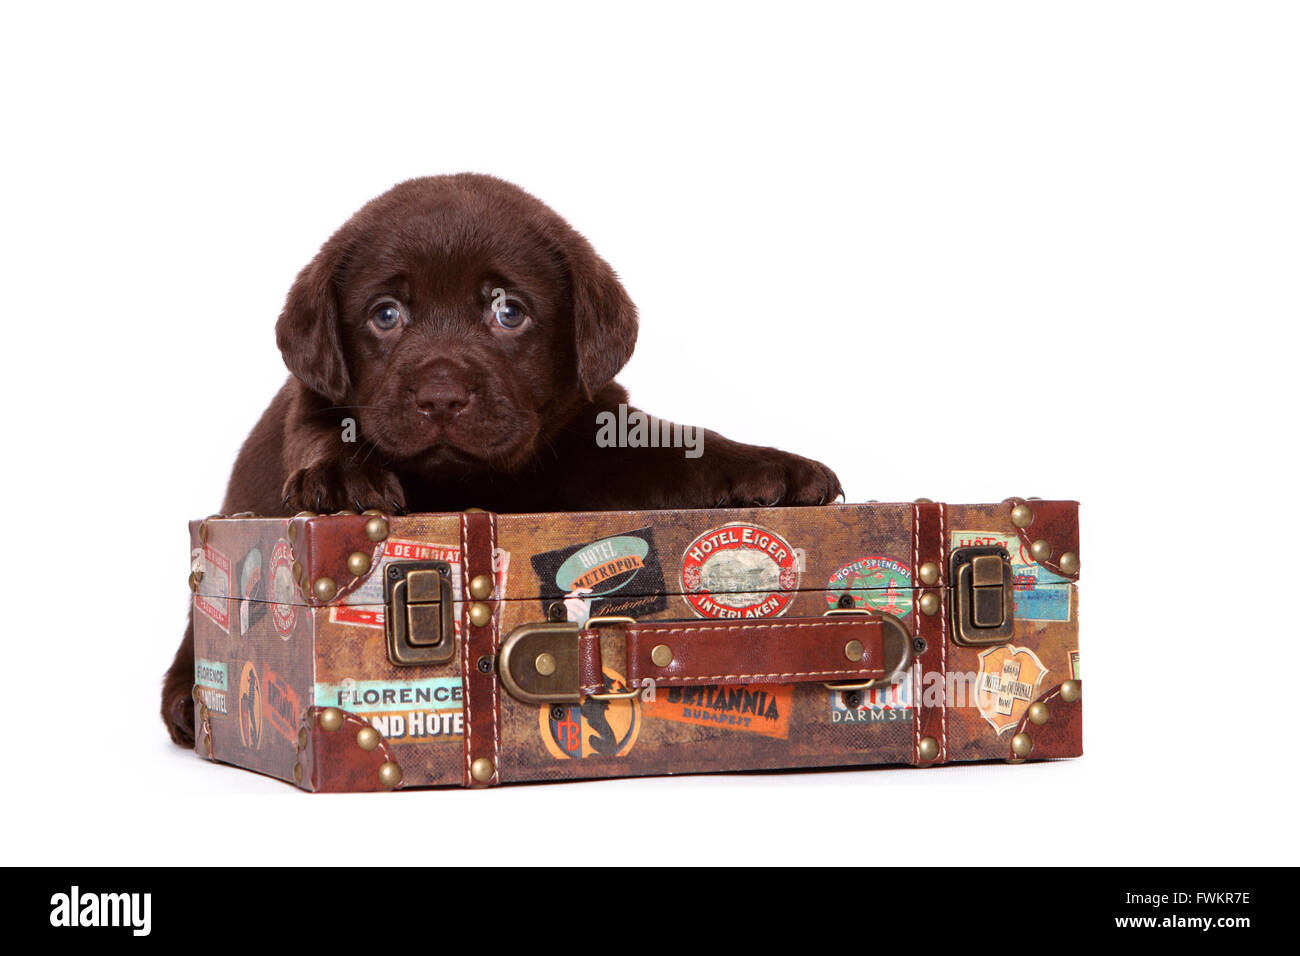 Labrador Retriever. Brown puppy (6 weeks old) sitting behind a suitcase. Studio picture against a white background. Germany Stock Photo